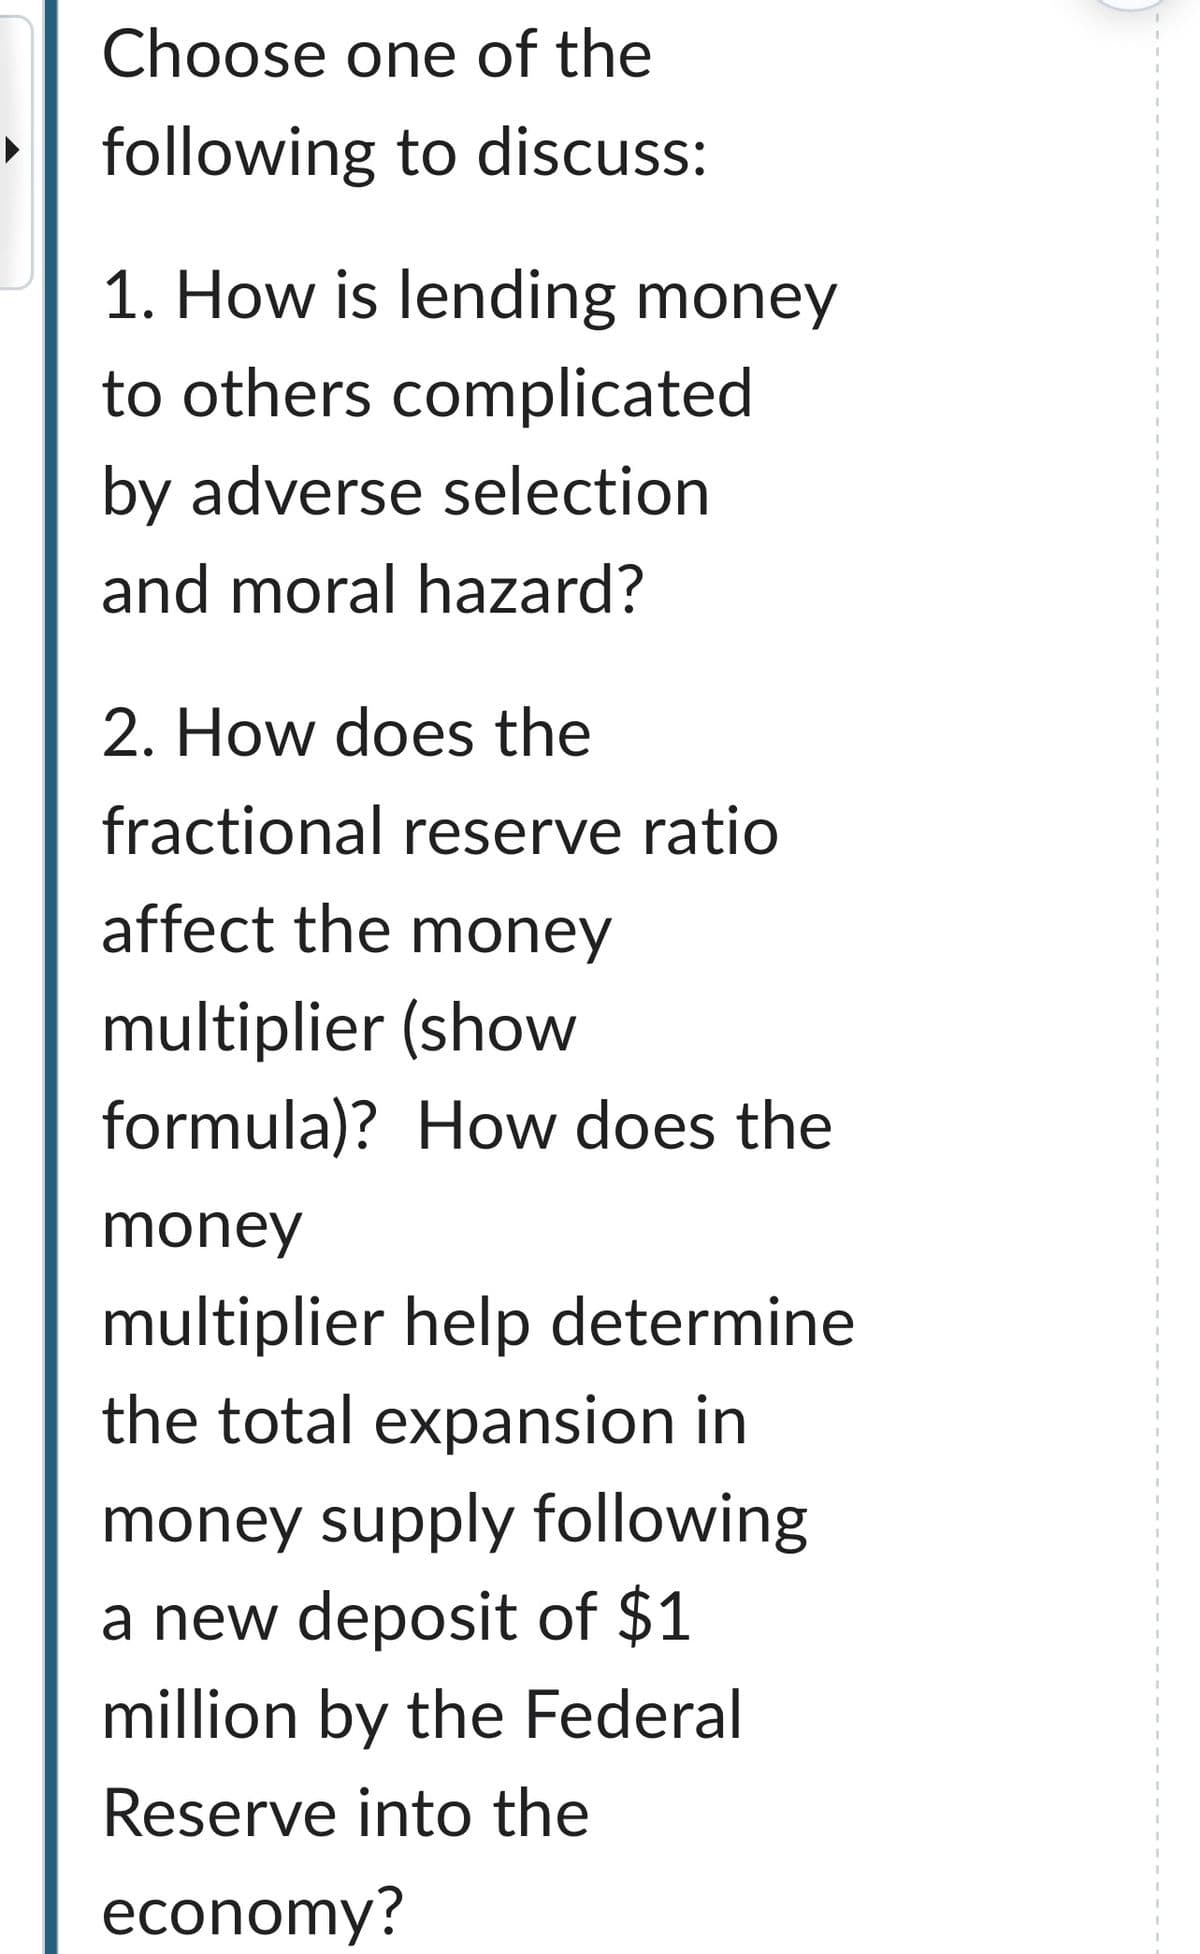 Choose one of the
following to discuss:
1. How is lending money
to others complicated
by adverse selection
and moral hazard?
2. How does the
fractional reserve ratio
affect the money
multiplier (show
formula)? How does the
money
multiplier help determine
the total expansion in
money supply following
a new deposit of $1
million by the Federal
Reserve into the
economy?